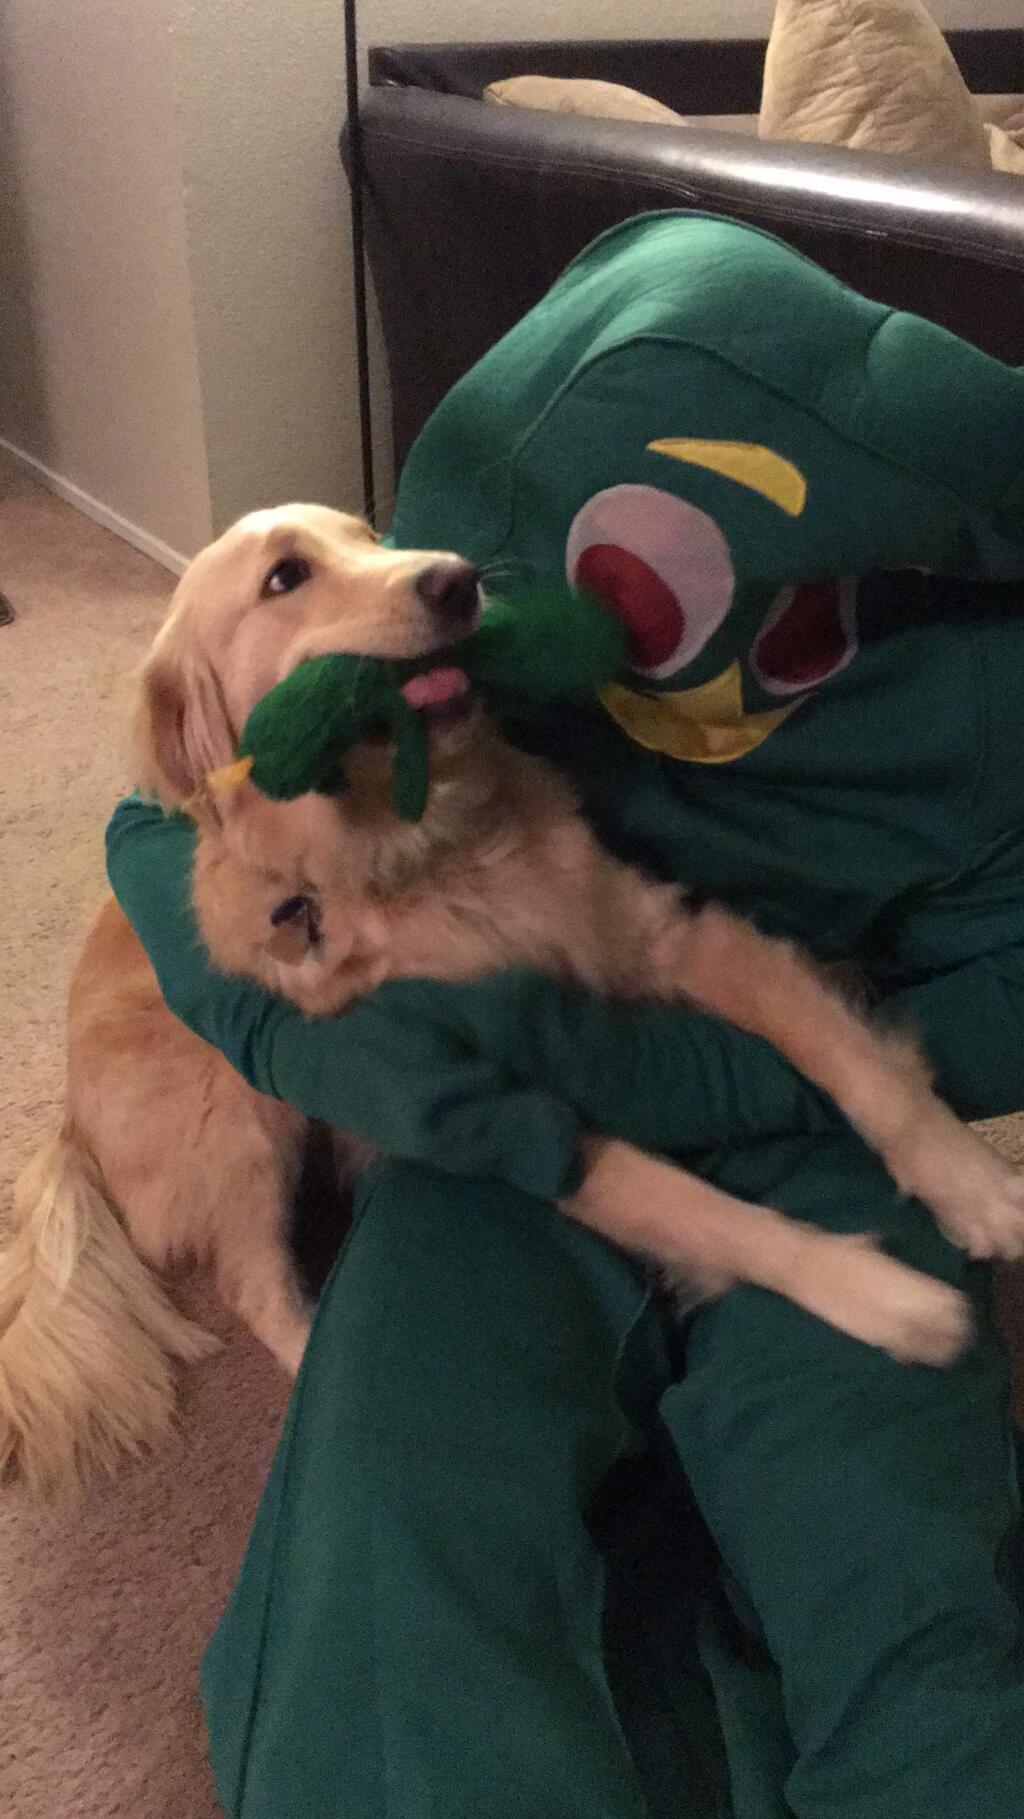 Ben Mesches of Petaluma, dressed as his dog Jolene's favorite toy, Gumby, enjoys the golden retriever's attention. (Submitted)